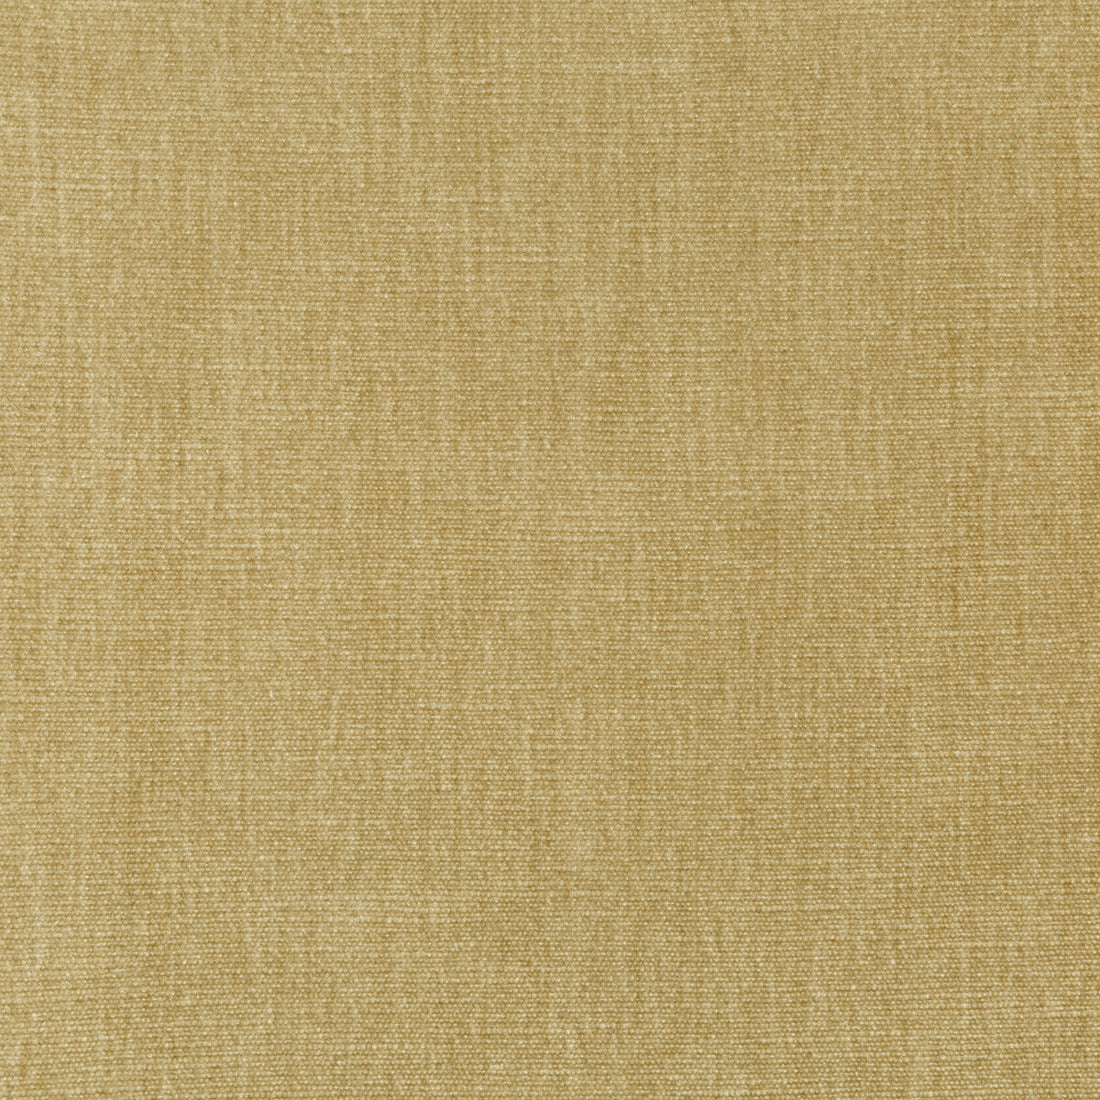 Kravet Smart fabric in 36076-16 color - pattern 36076.16.0 - by Kravet Smart in the Sumptuous Chenille II collection